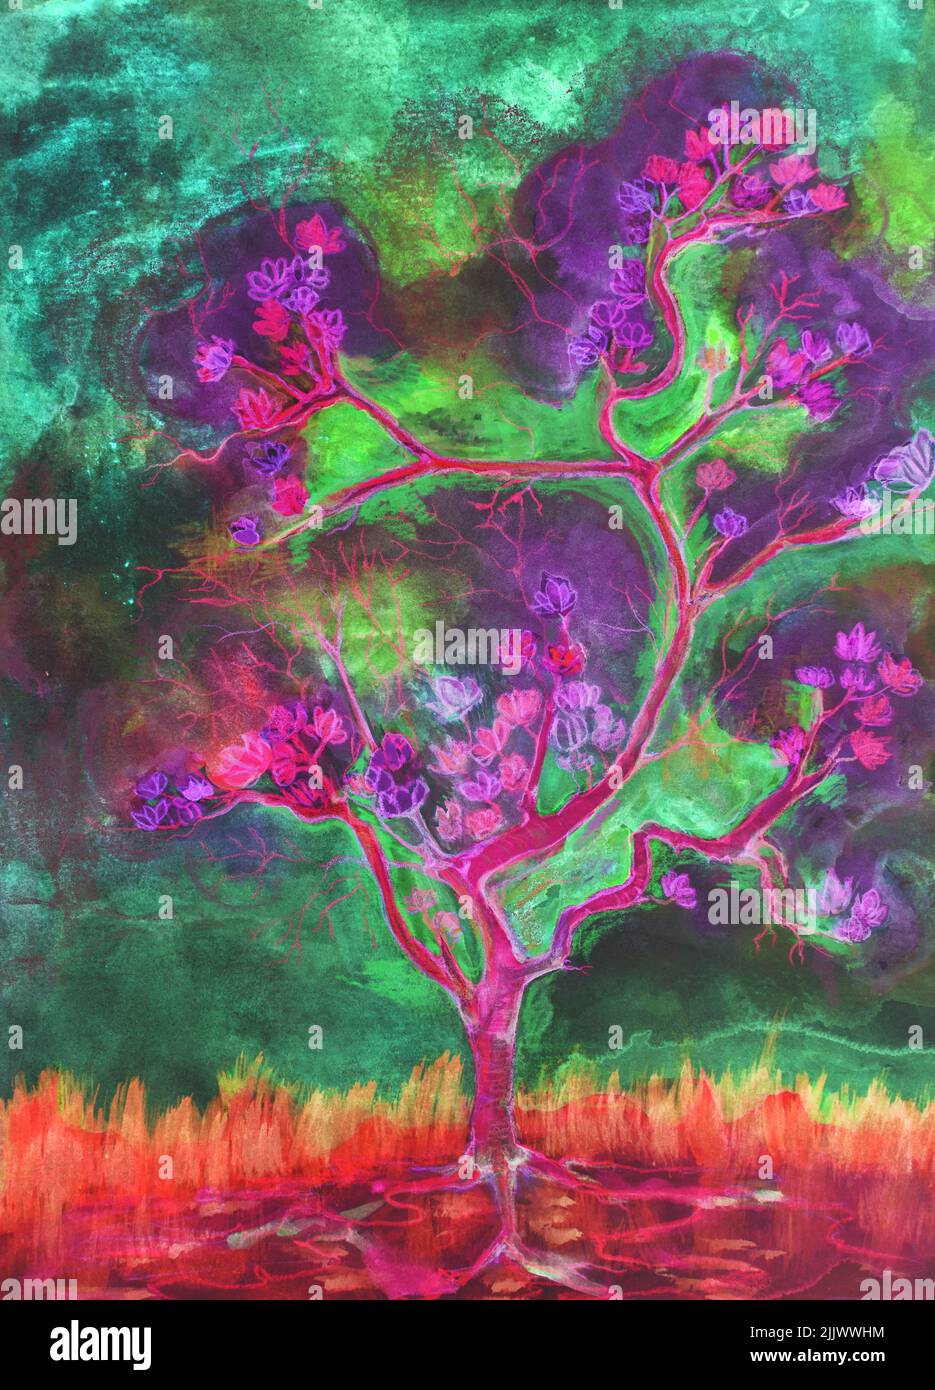 Psychedelic lotus flowers on a tree. The dabbing technique near the edges gives a soft focus effect due to the altered surface roughness of the paper. Stock Photo